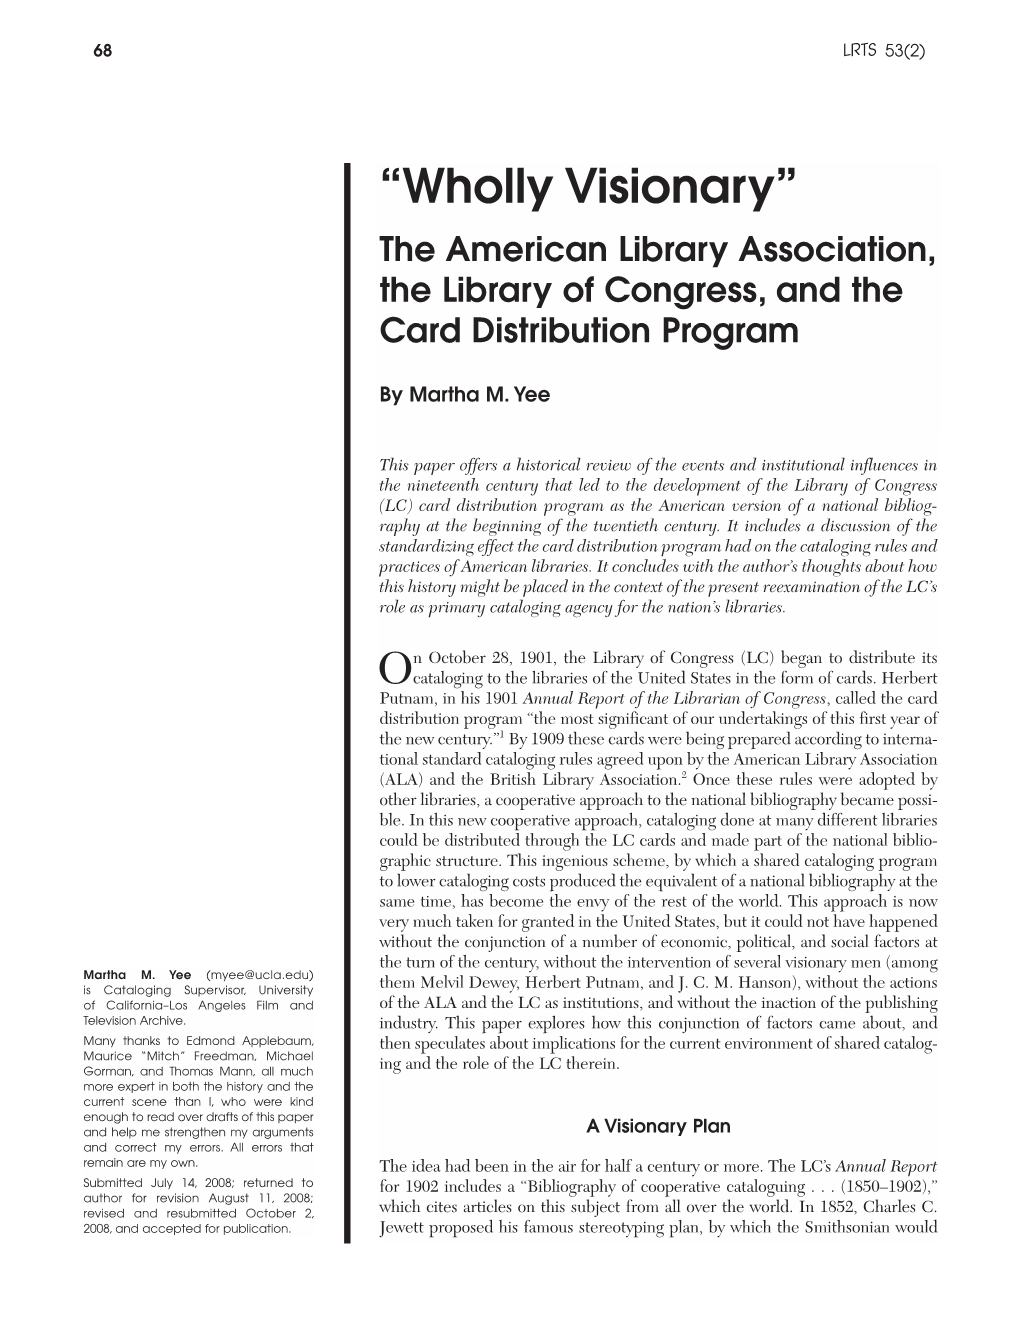 “Wholly Visionary” the American Library Association, the Library of Congress, and the Card Distribution Program